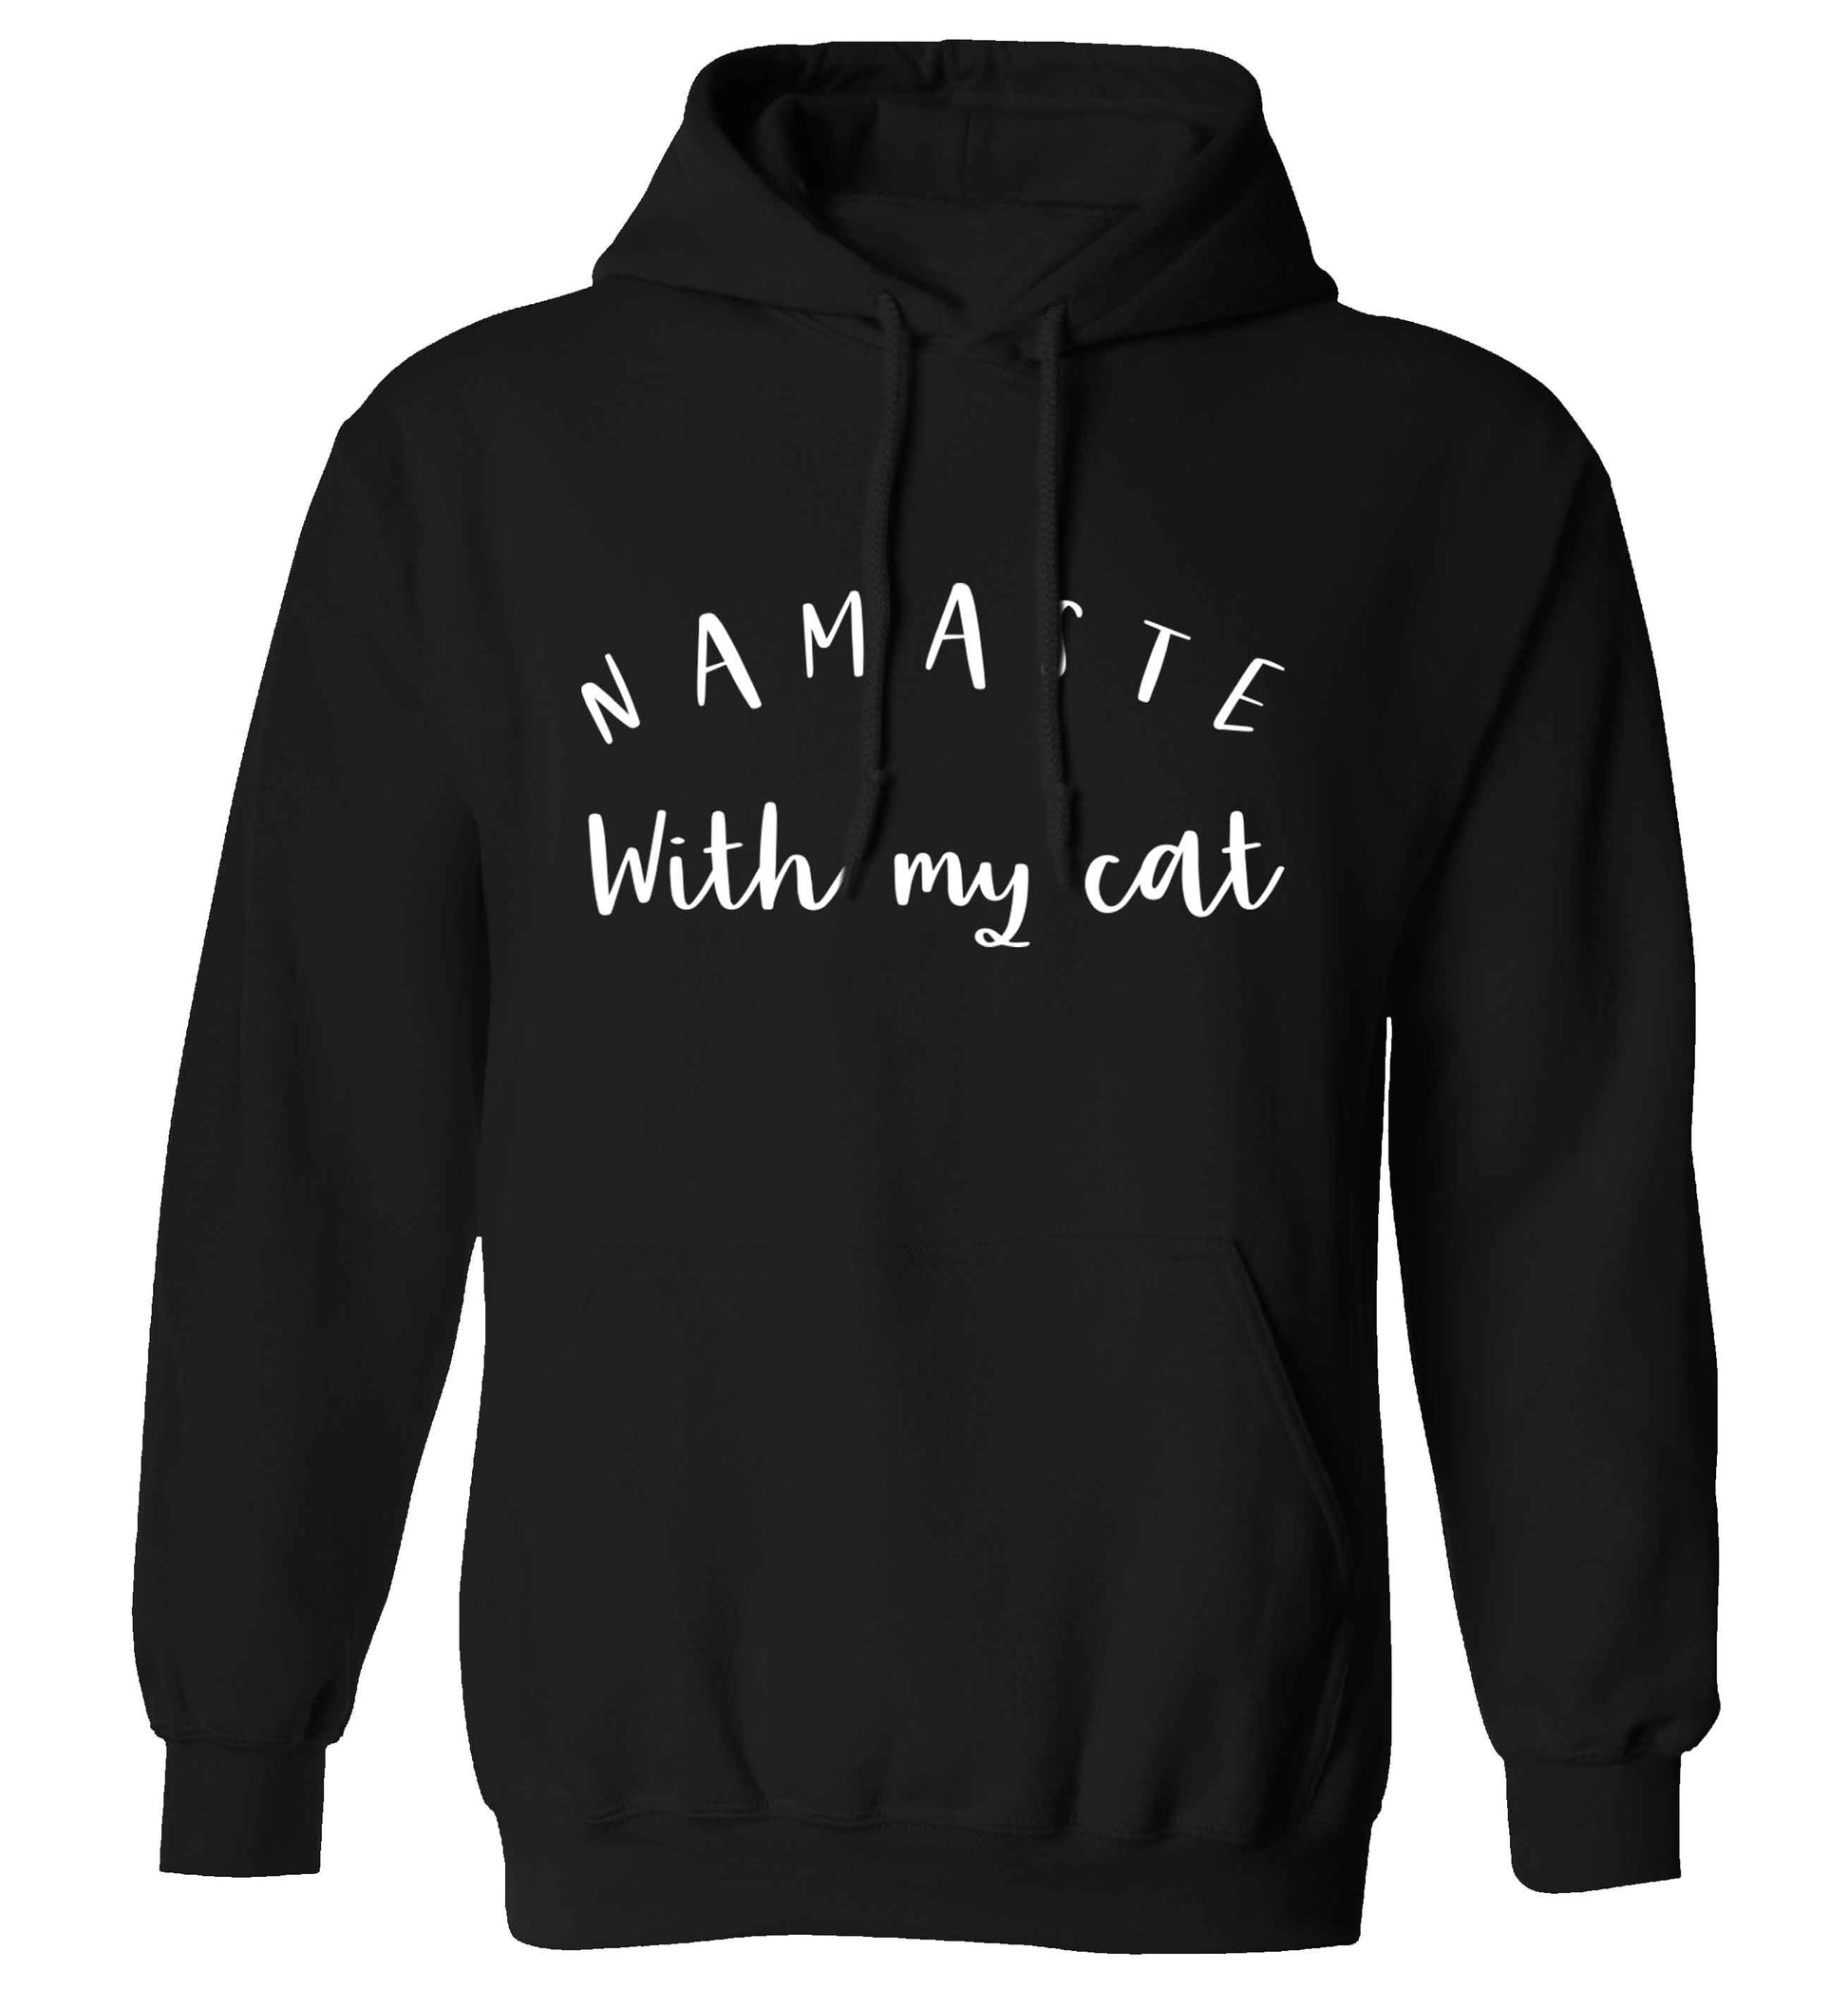 Namaste with my cat adults unisex black hoodie 2XL